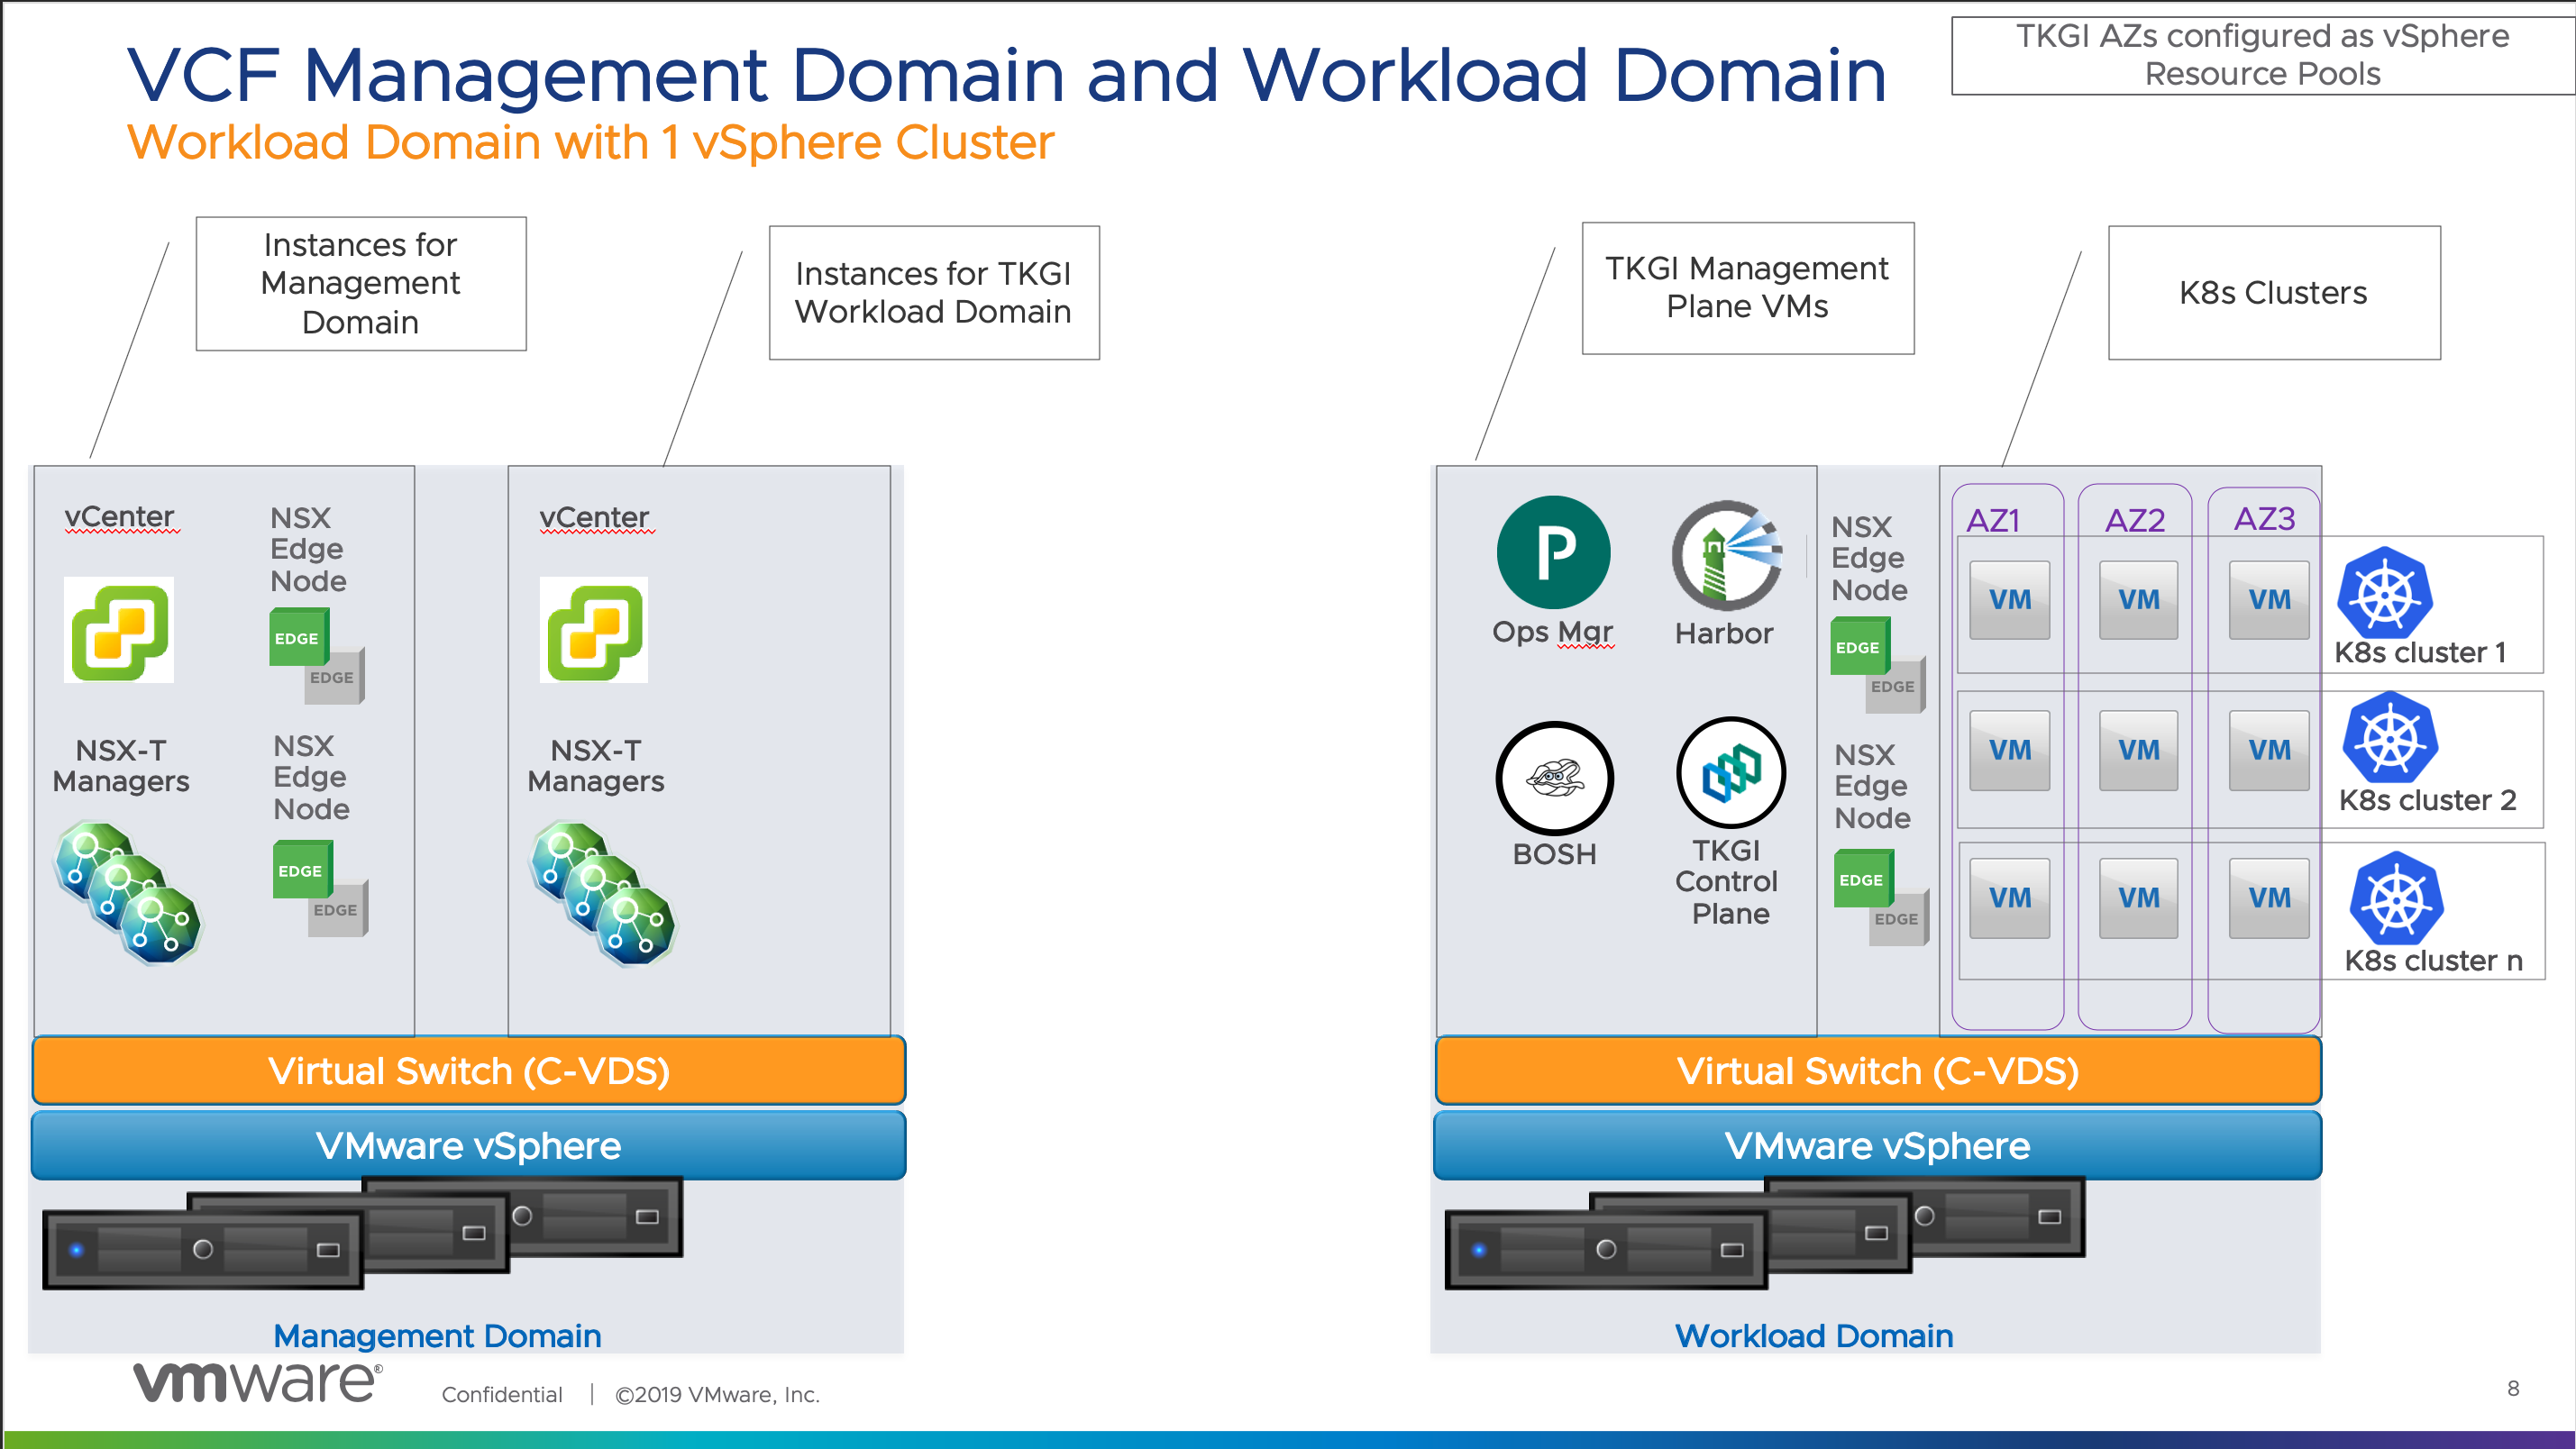 Workload Domain with one vSphere Cluster